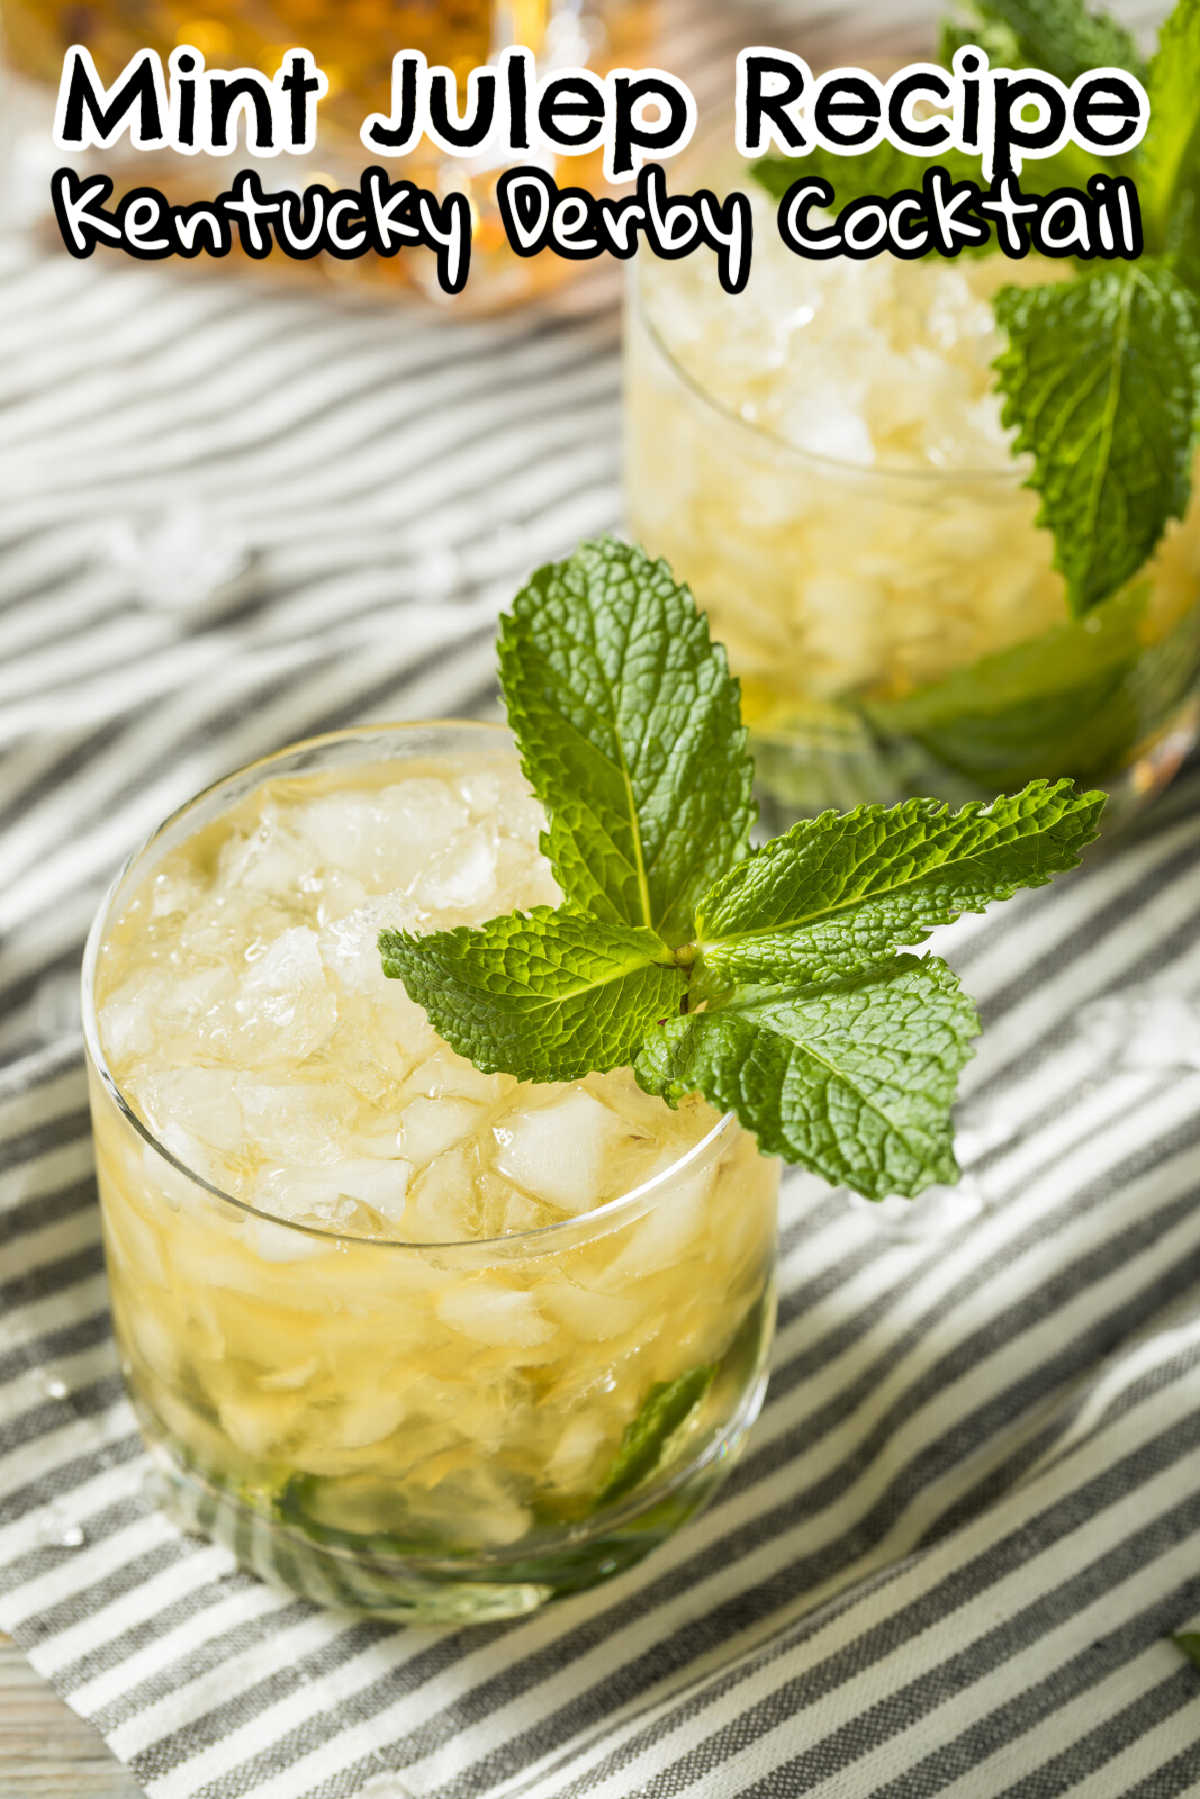 2 glasses of mint julep recipe on a white and gray striped tea towel